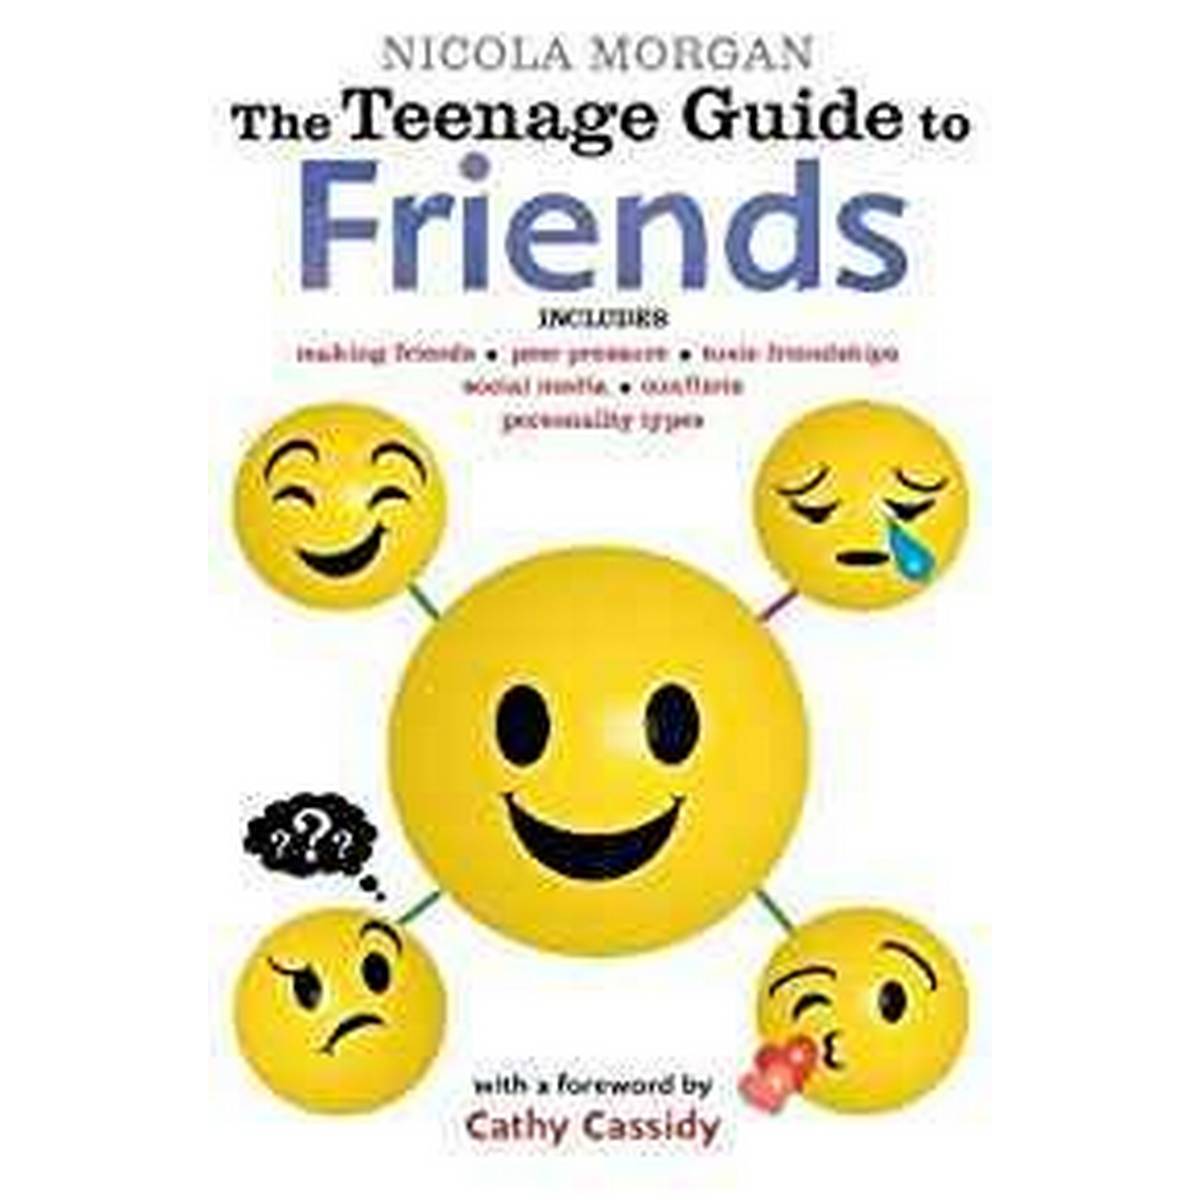 The Teenage Guide to Friends